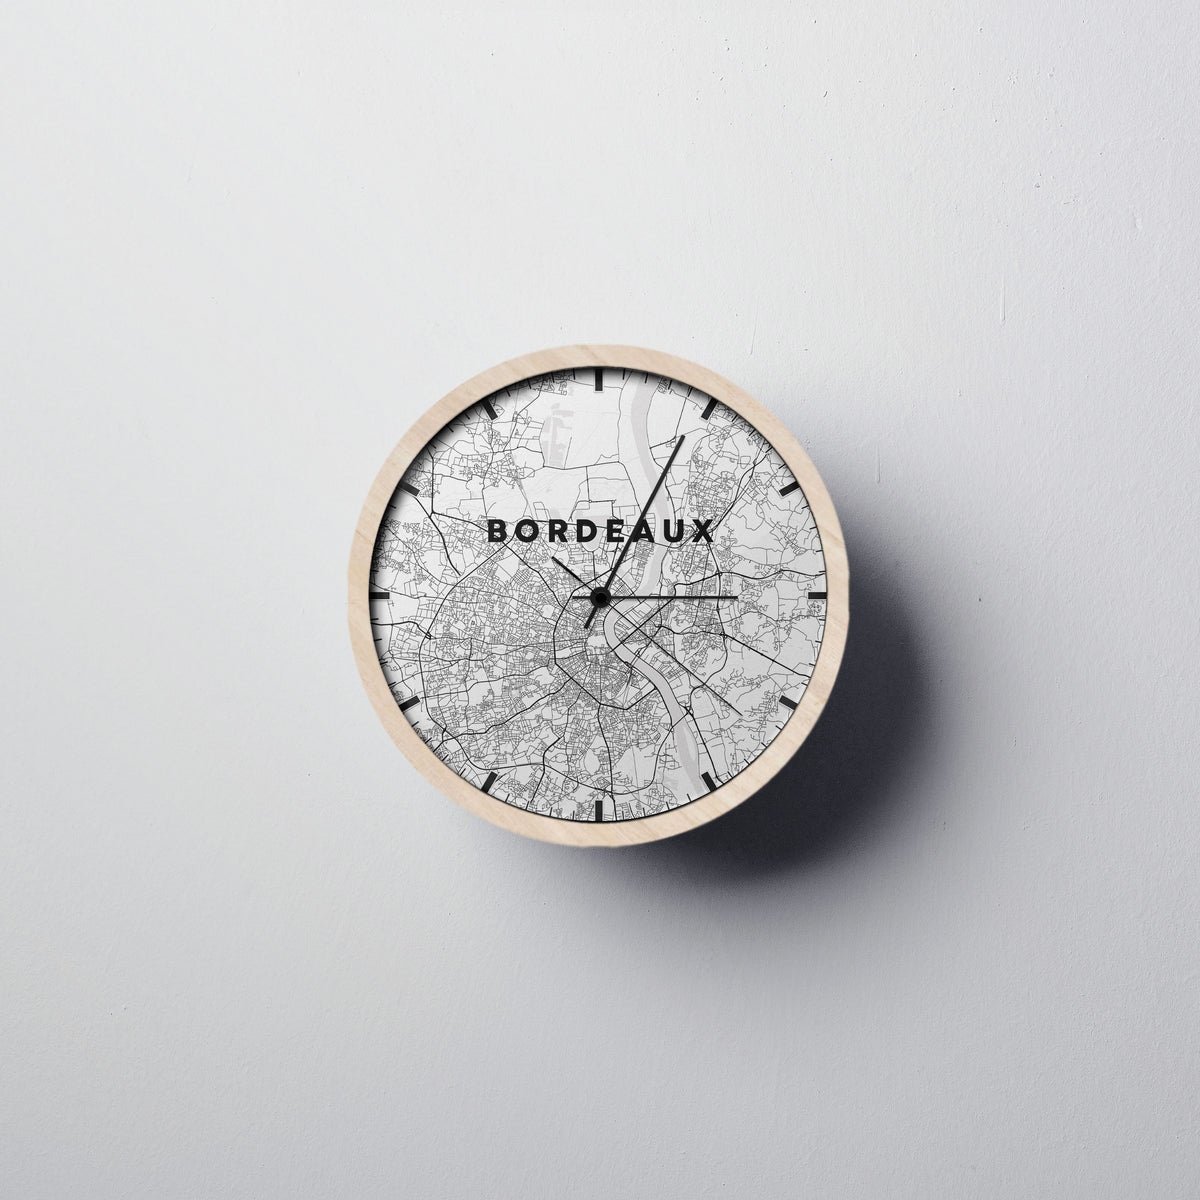 Bordeaux Wall Clock - Point Two Design